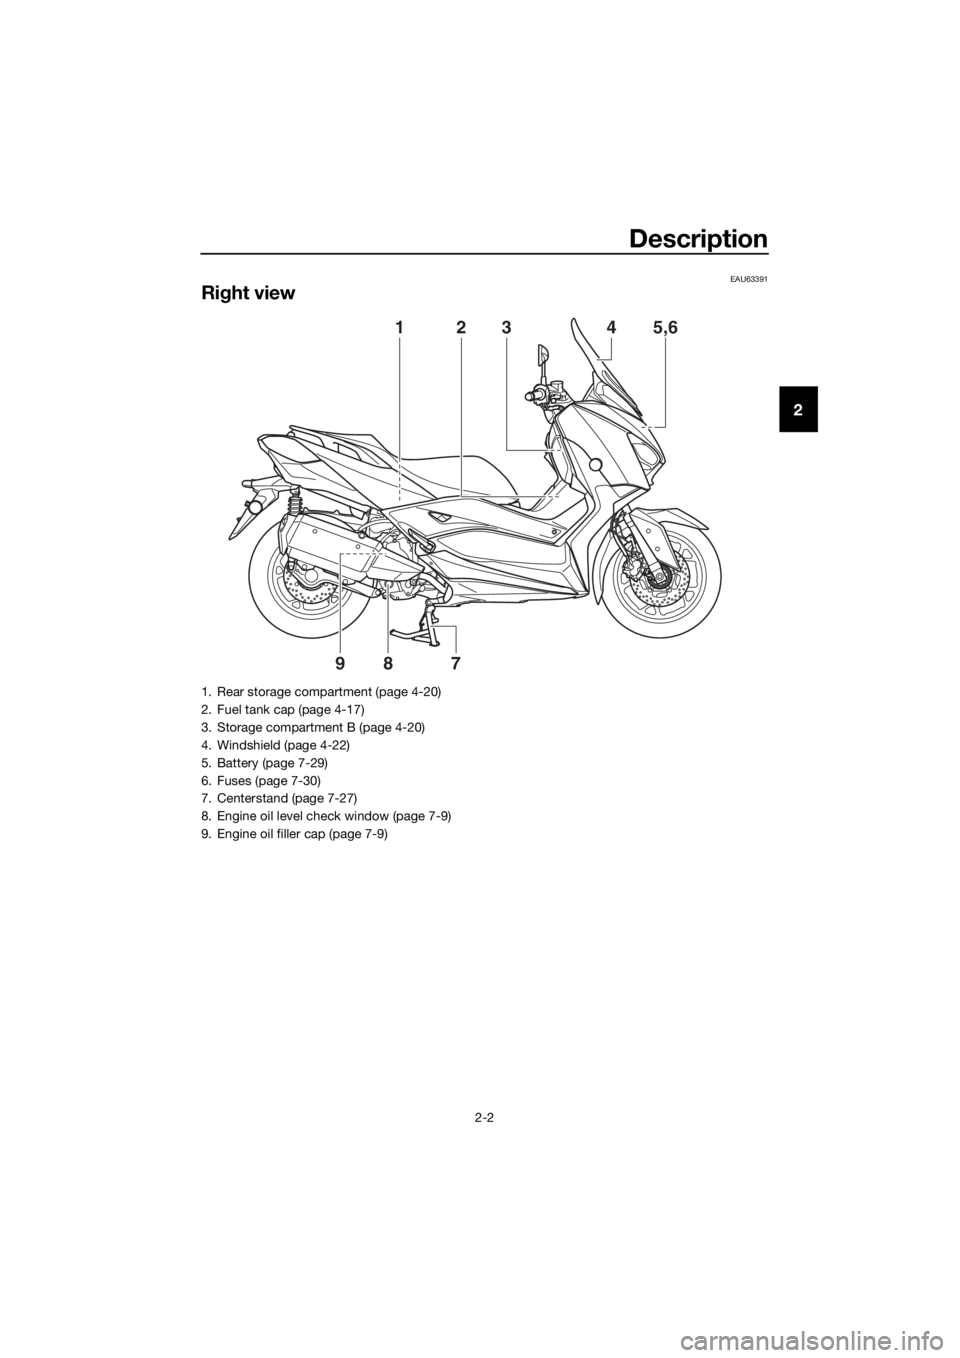 YAMAHA XMAX 300 2018  Owners Manual Description
2-2
2
EAU63391
Right view
2345,61
987
1. Rear storage compartment (page 4-20)
2. Fuel tank cap (page 4-17)
3. Storage compartment B (page 4-20)
4. Windshield (page 4-22)
5. Battery (page 7